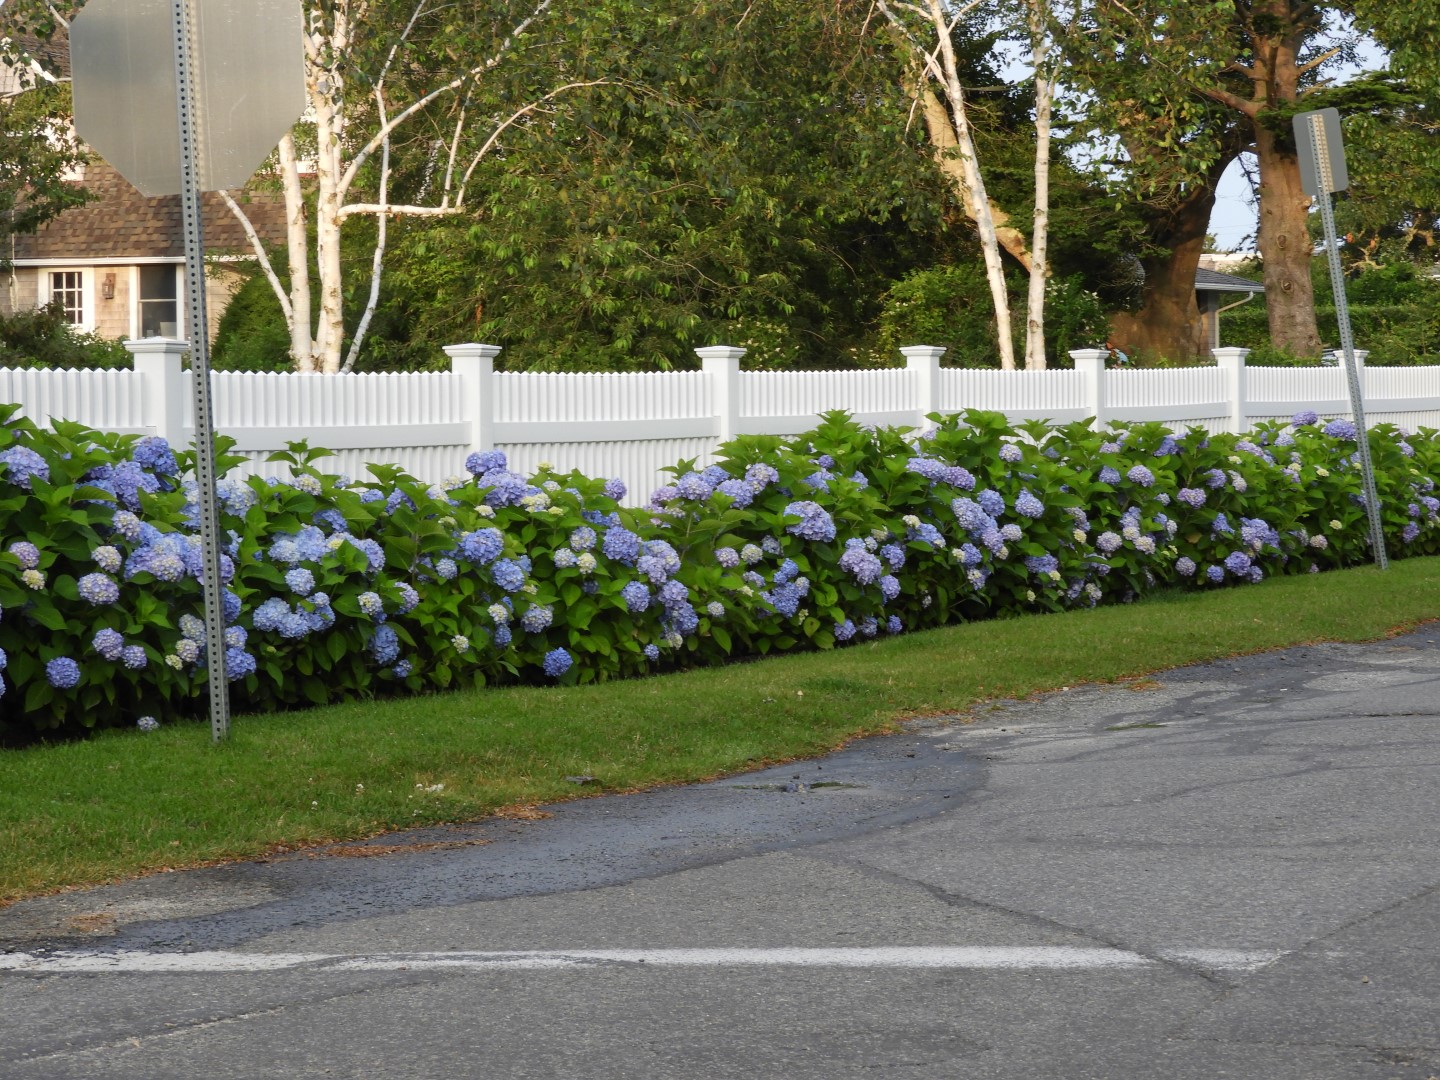 Flowers blooming near Kennedy Compound in Hyannis MA